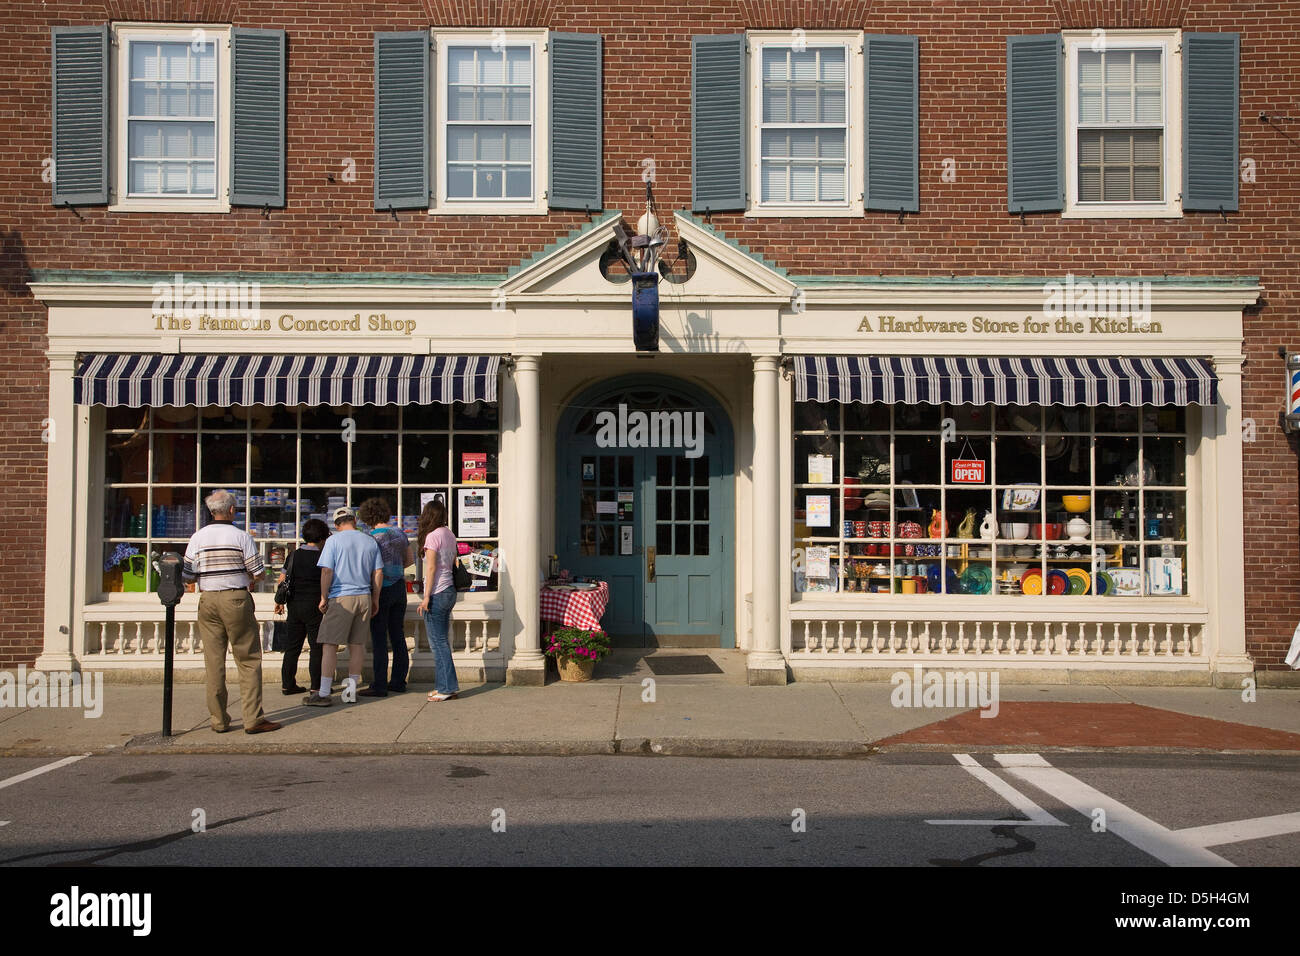 Tourists look into window of The Famous Concord Shop in historic Concor, MA outside of Boston on Memorial Day, 2011 Stock Photo